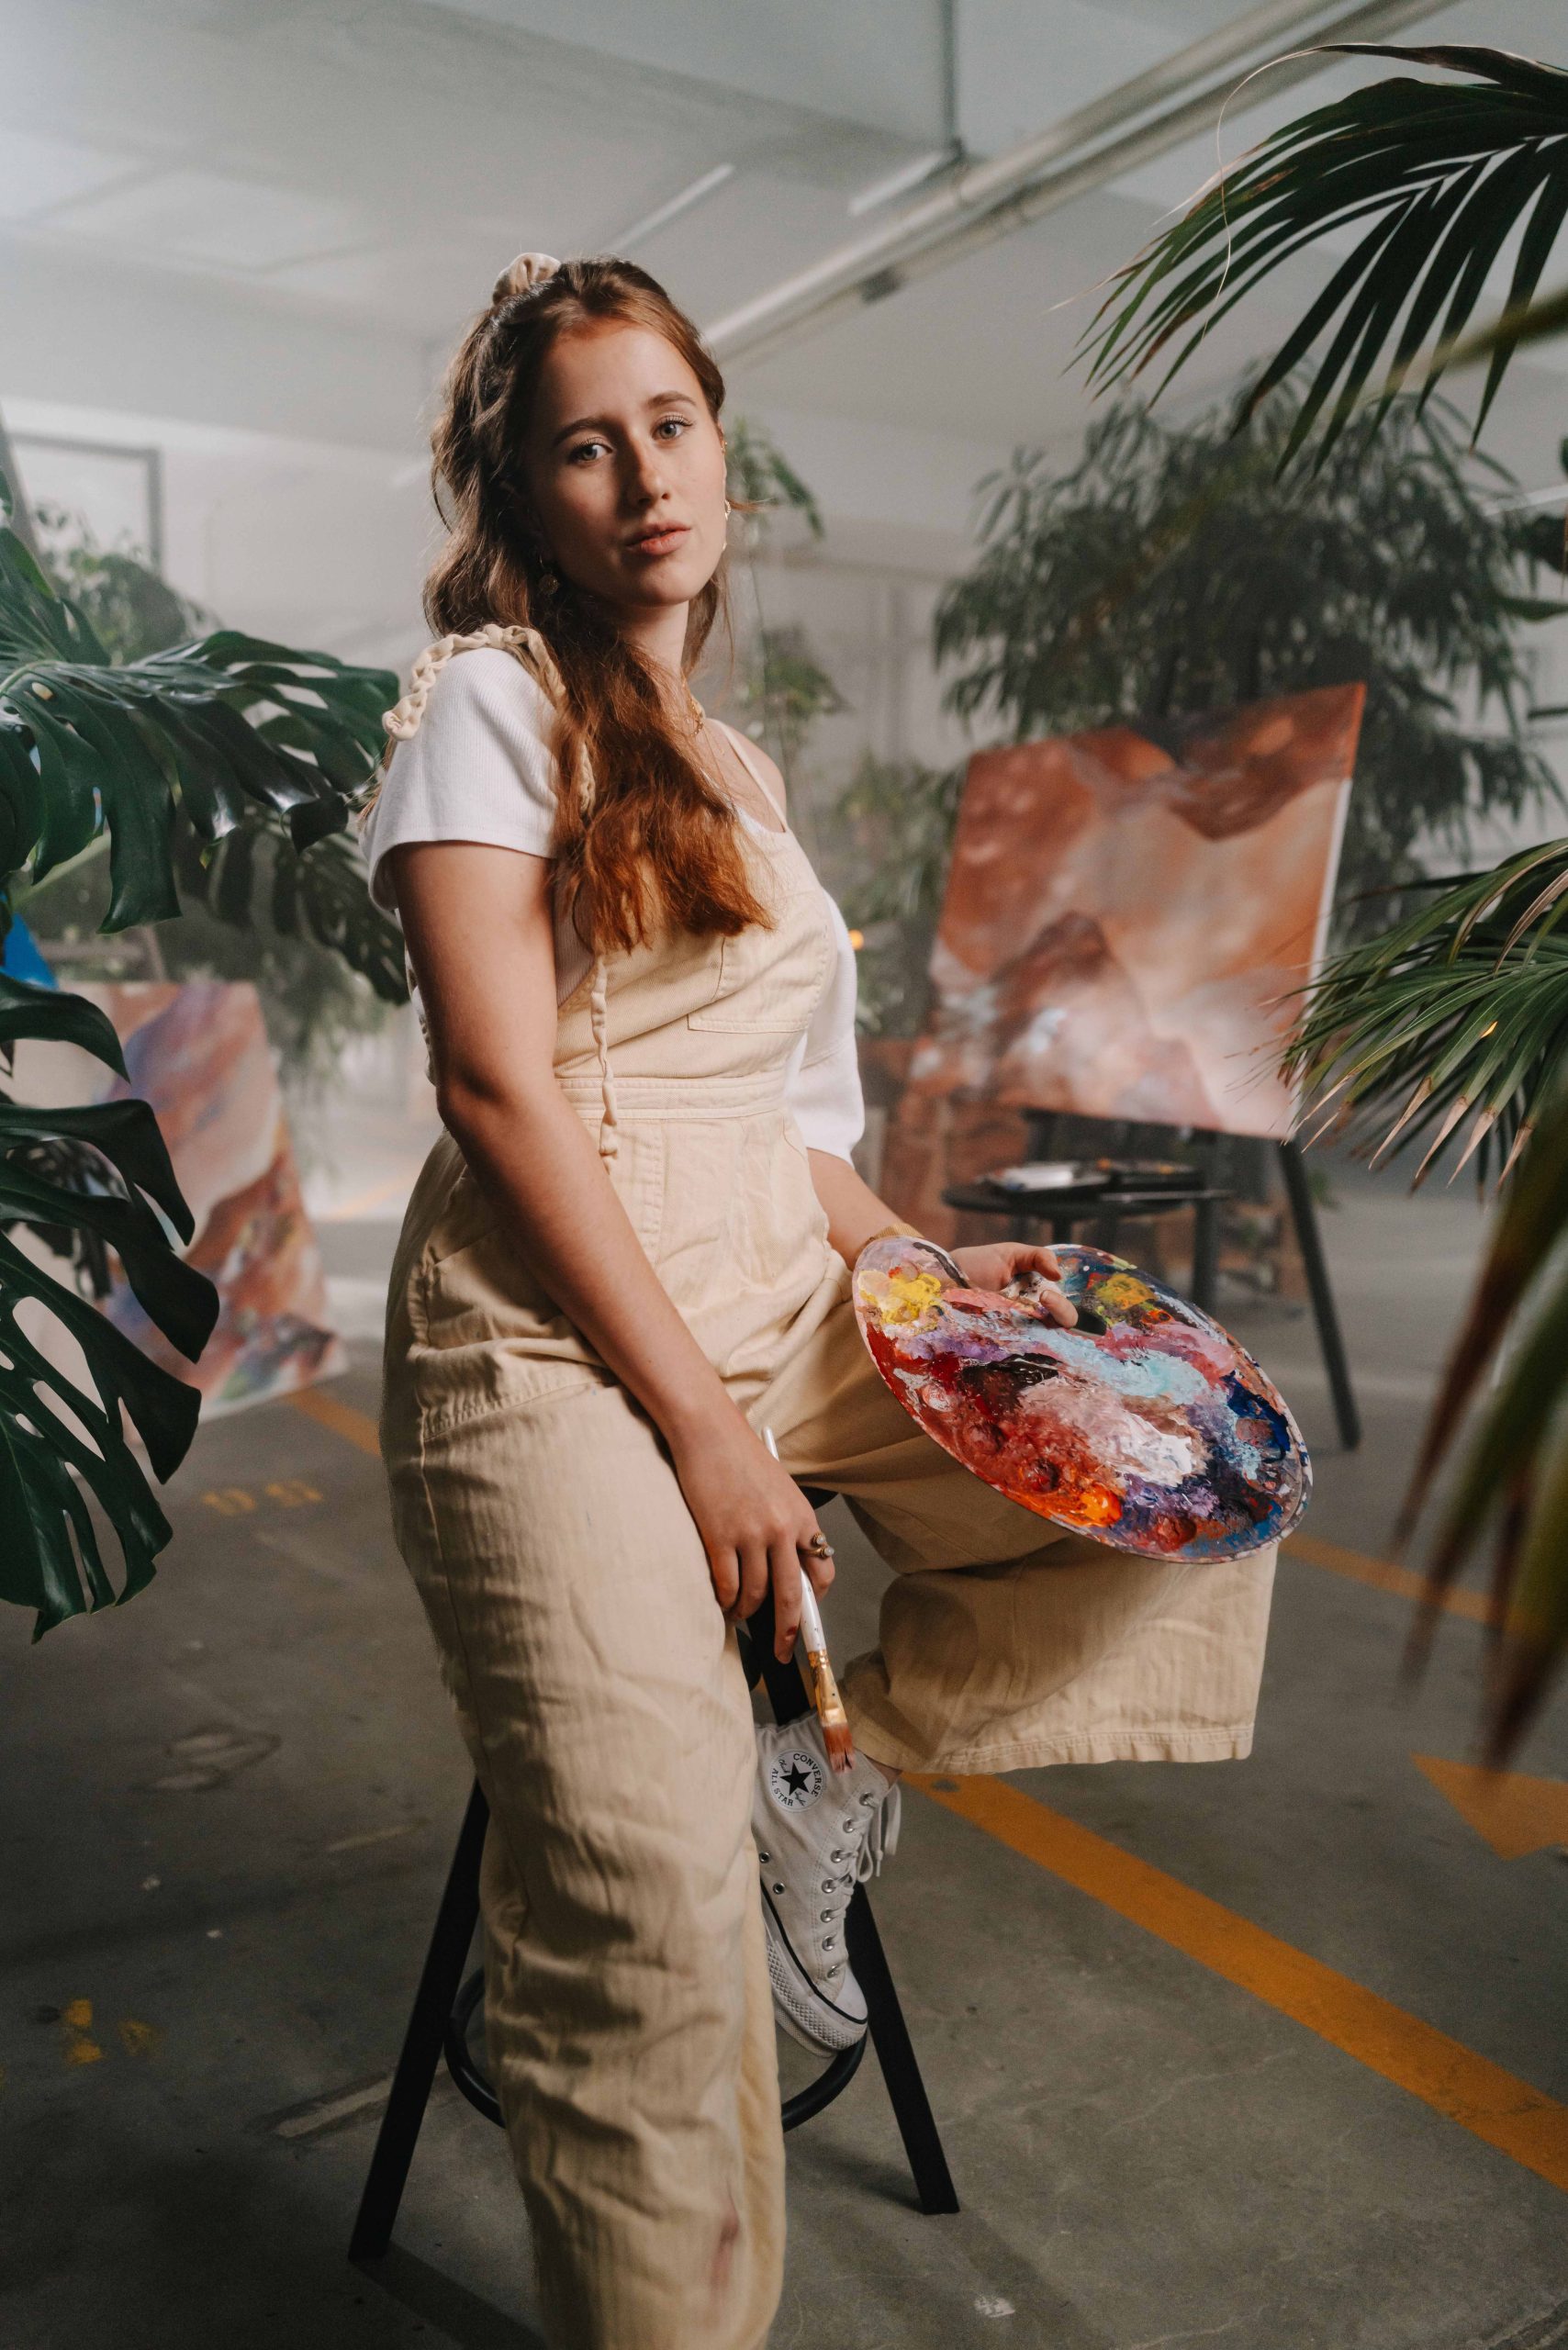 This photography was taken on a job for Stabilo, a pen manufacturer based near Nürnberg. The model is sitting on a chair with painting gear in her hands. She is sitting in a room full of plants and paintings looking straight into the camera.